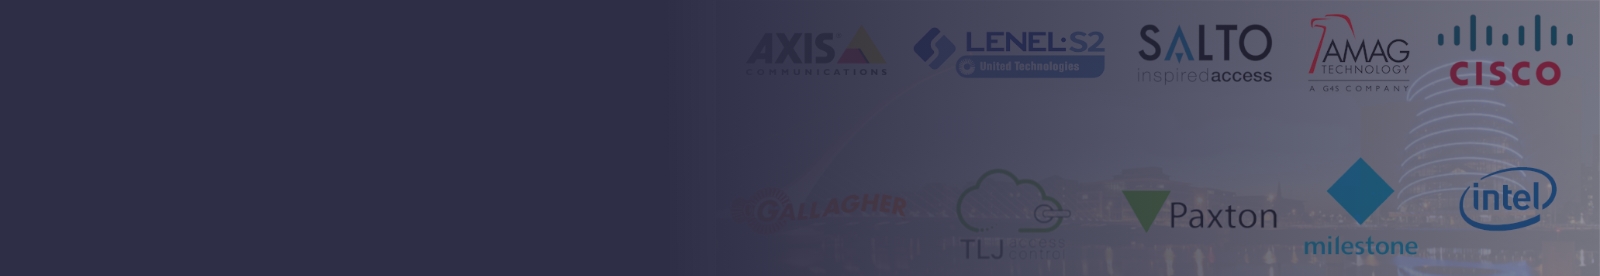 Axis Solution Gold Partner